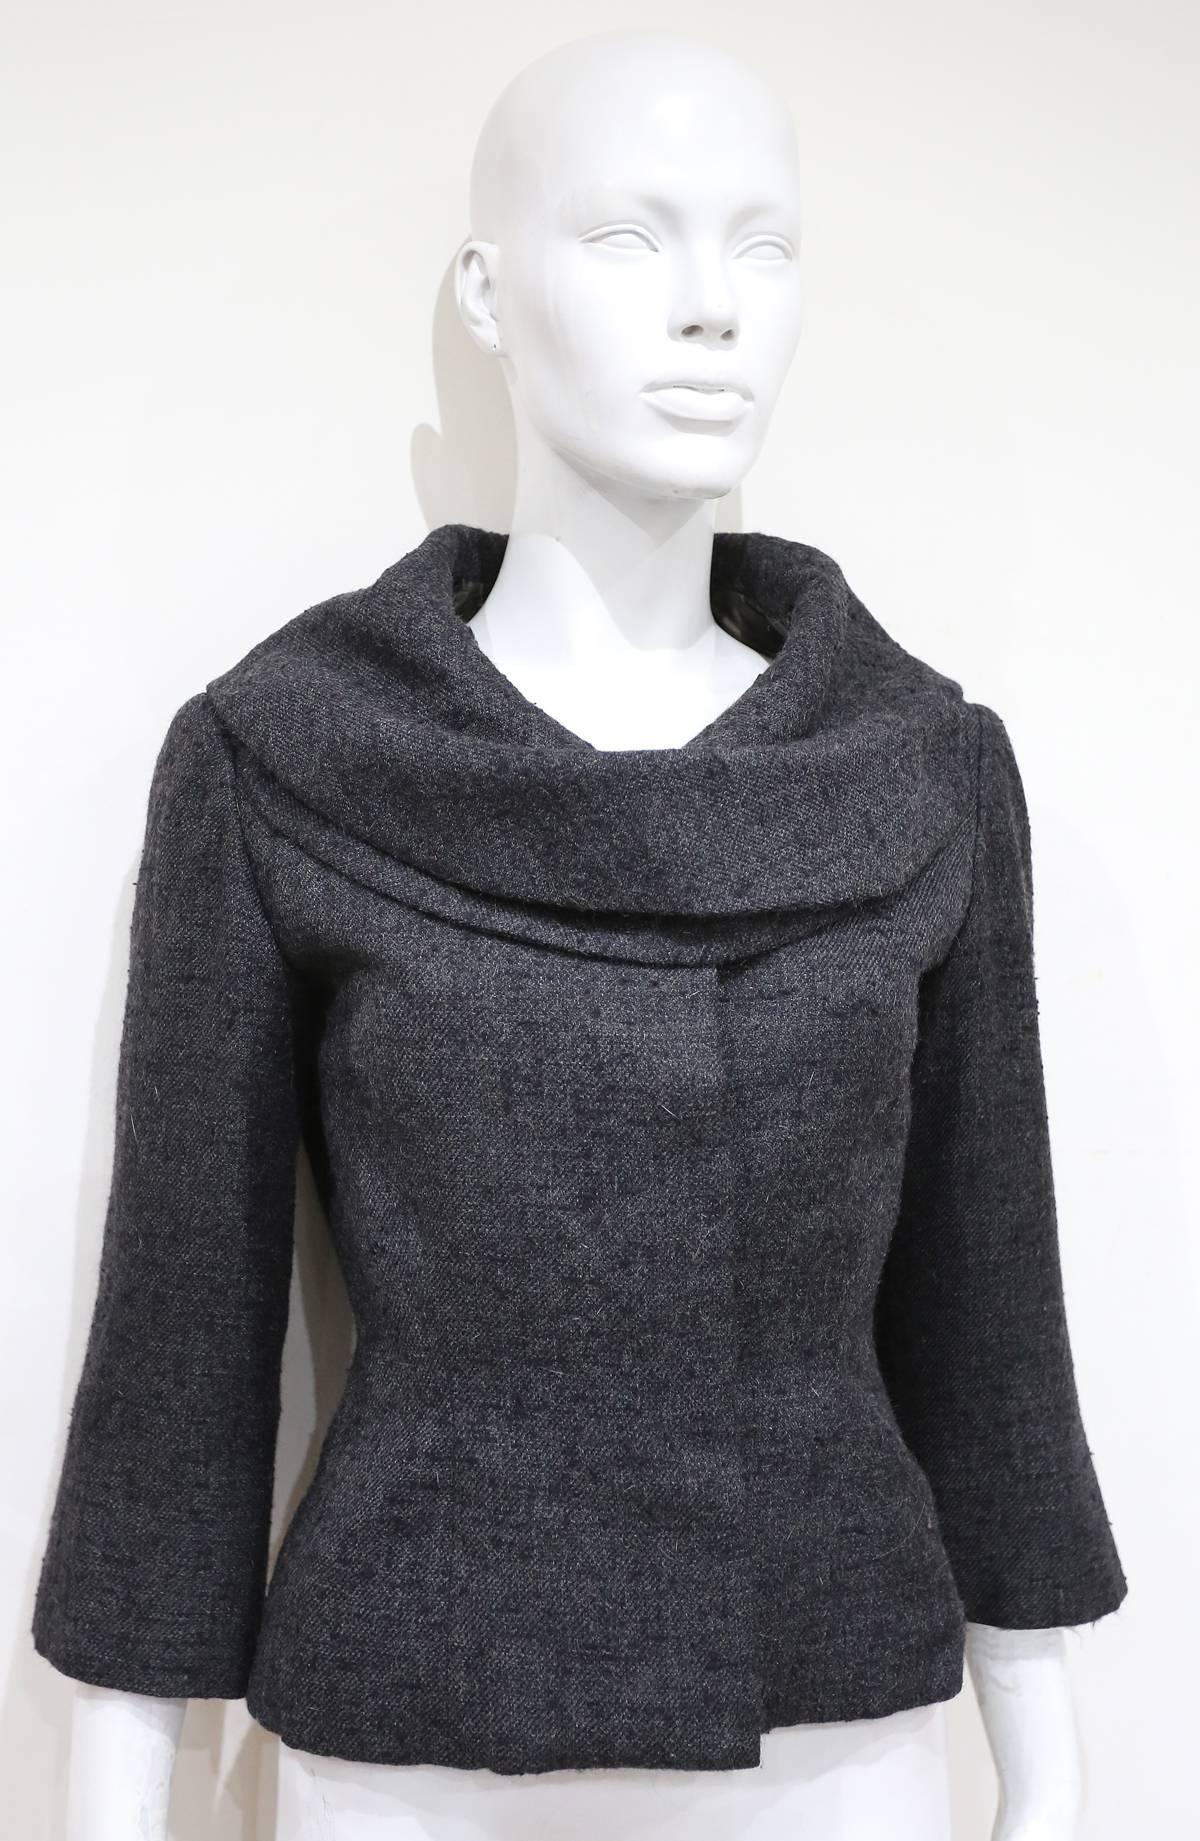 Jeanne Lanvin by Castillo tailored woollen jacket with mink fur scarf, c. 1950s In Excellent Condition For Sale In London, GB